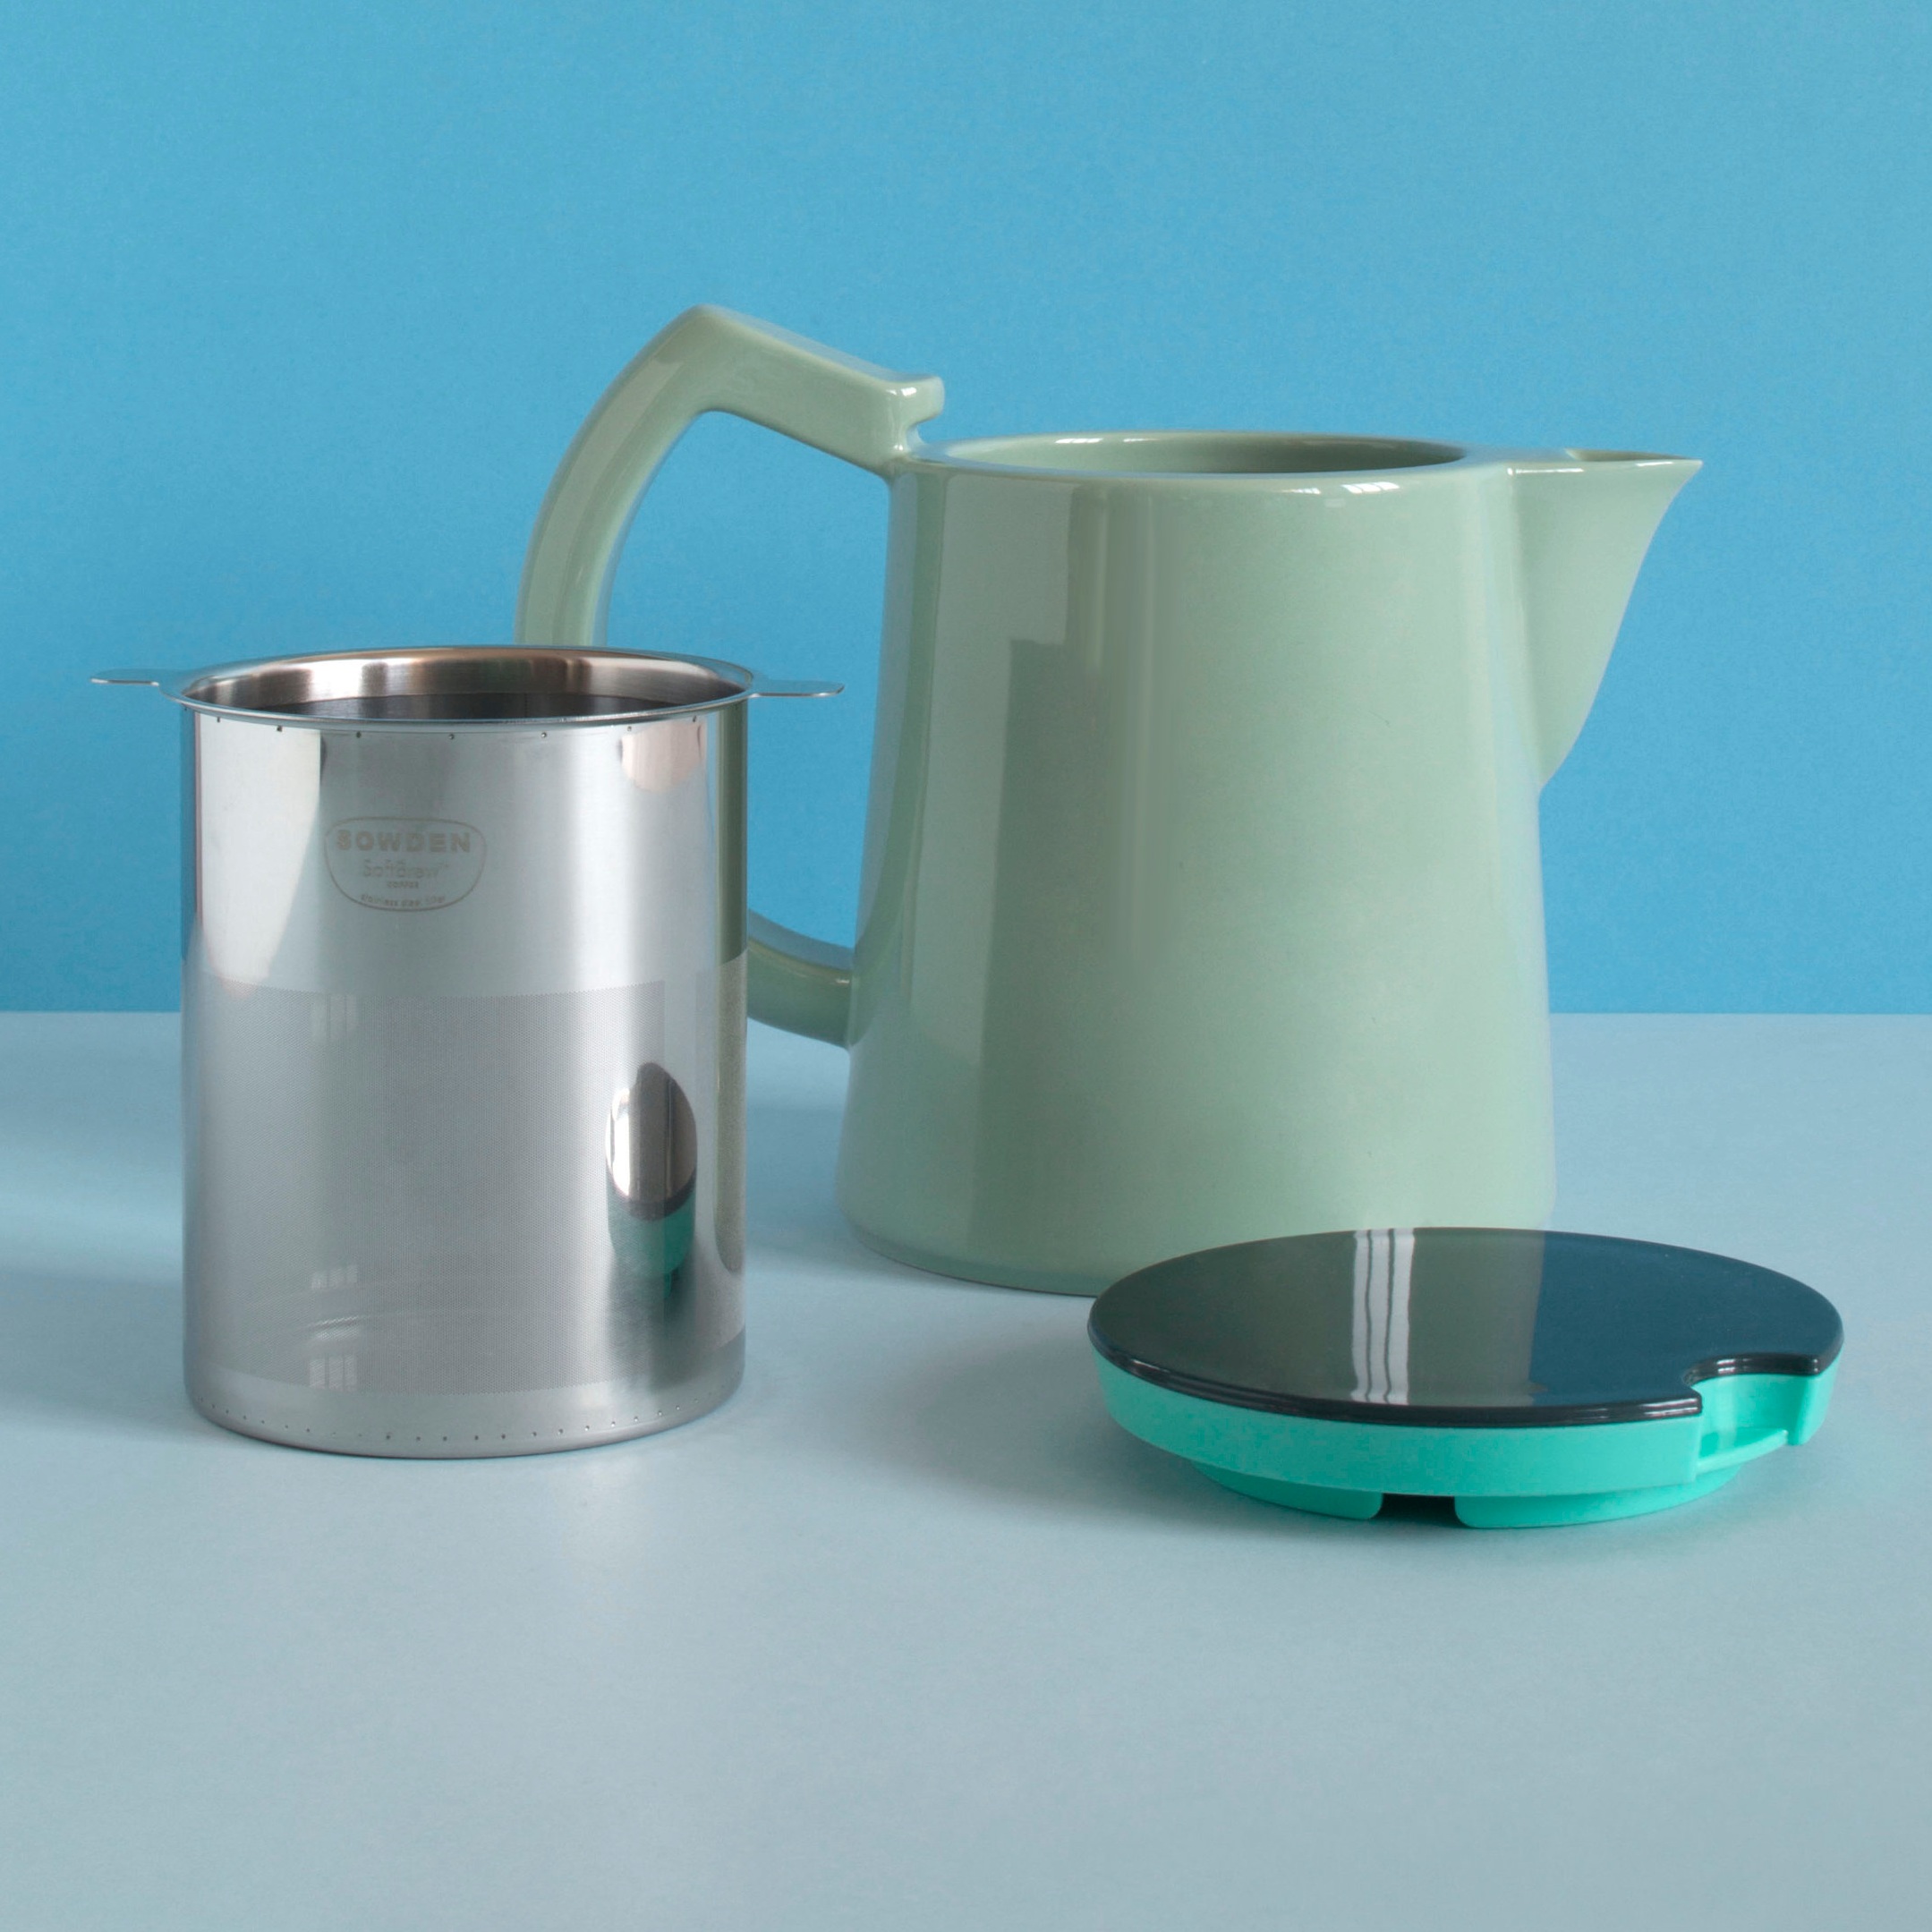 Sowden Coffee Maker by Hay